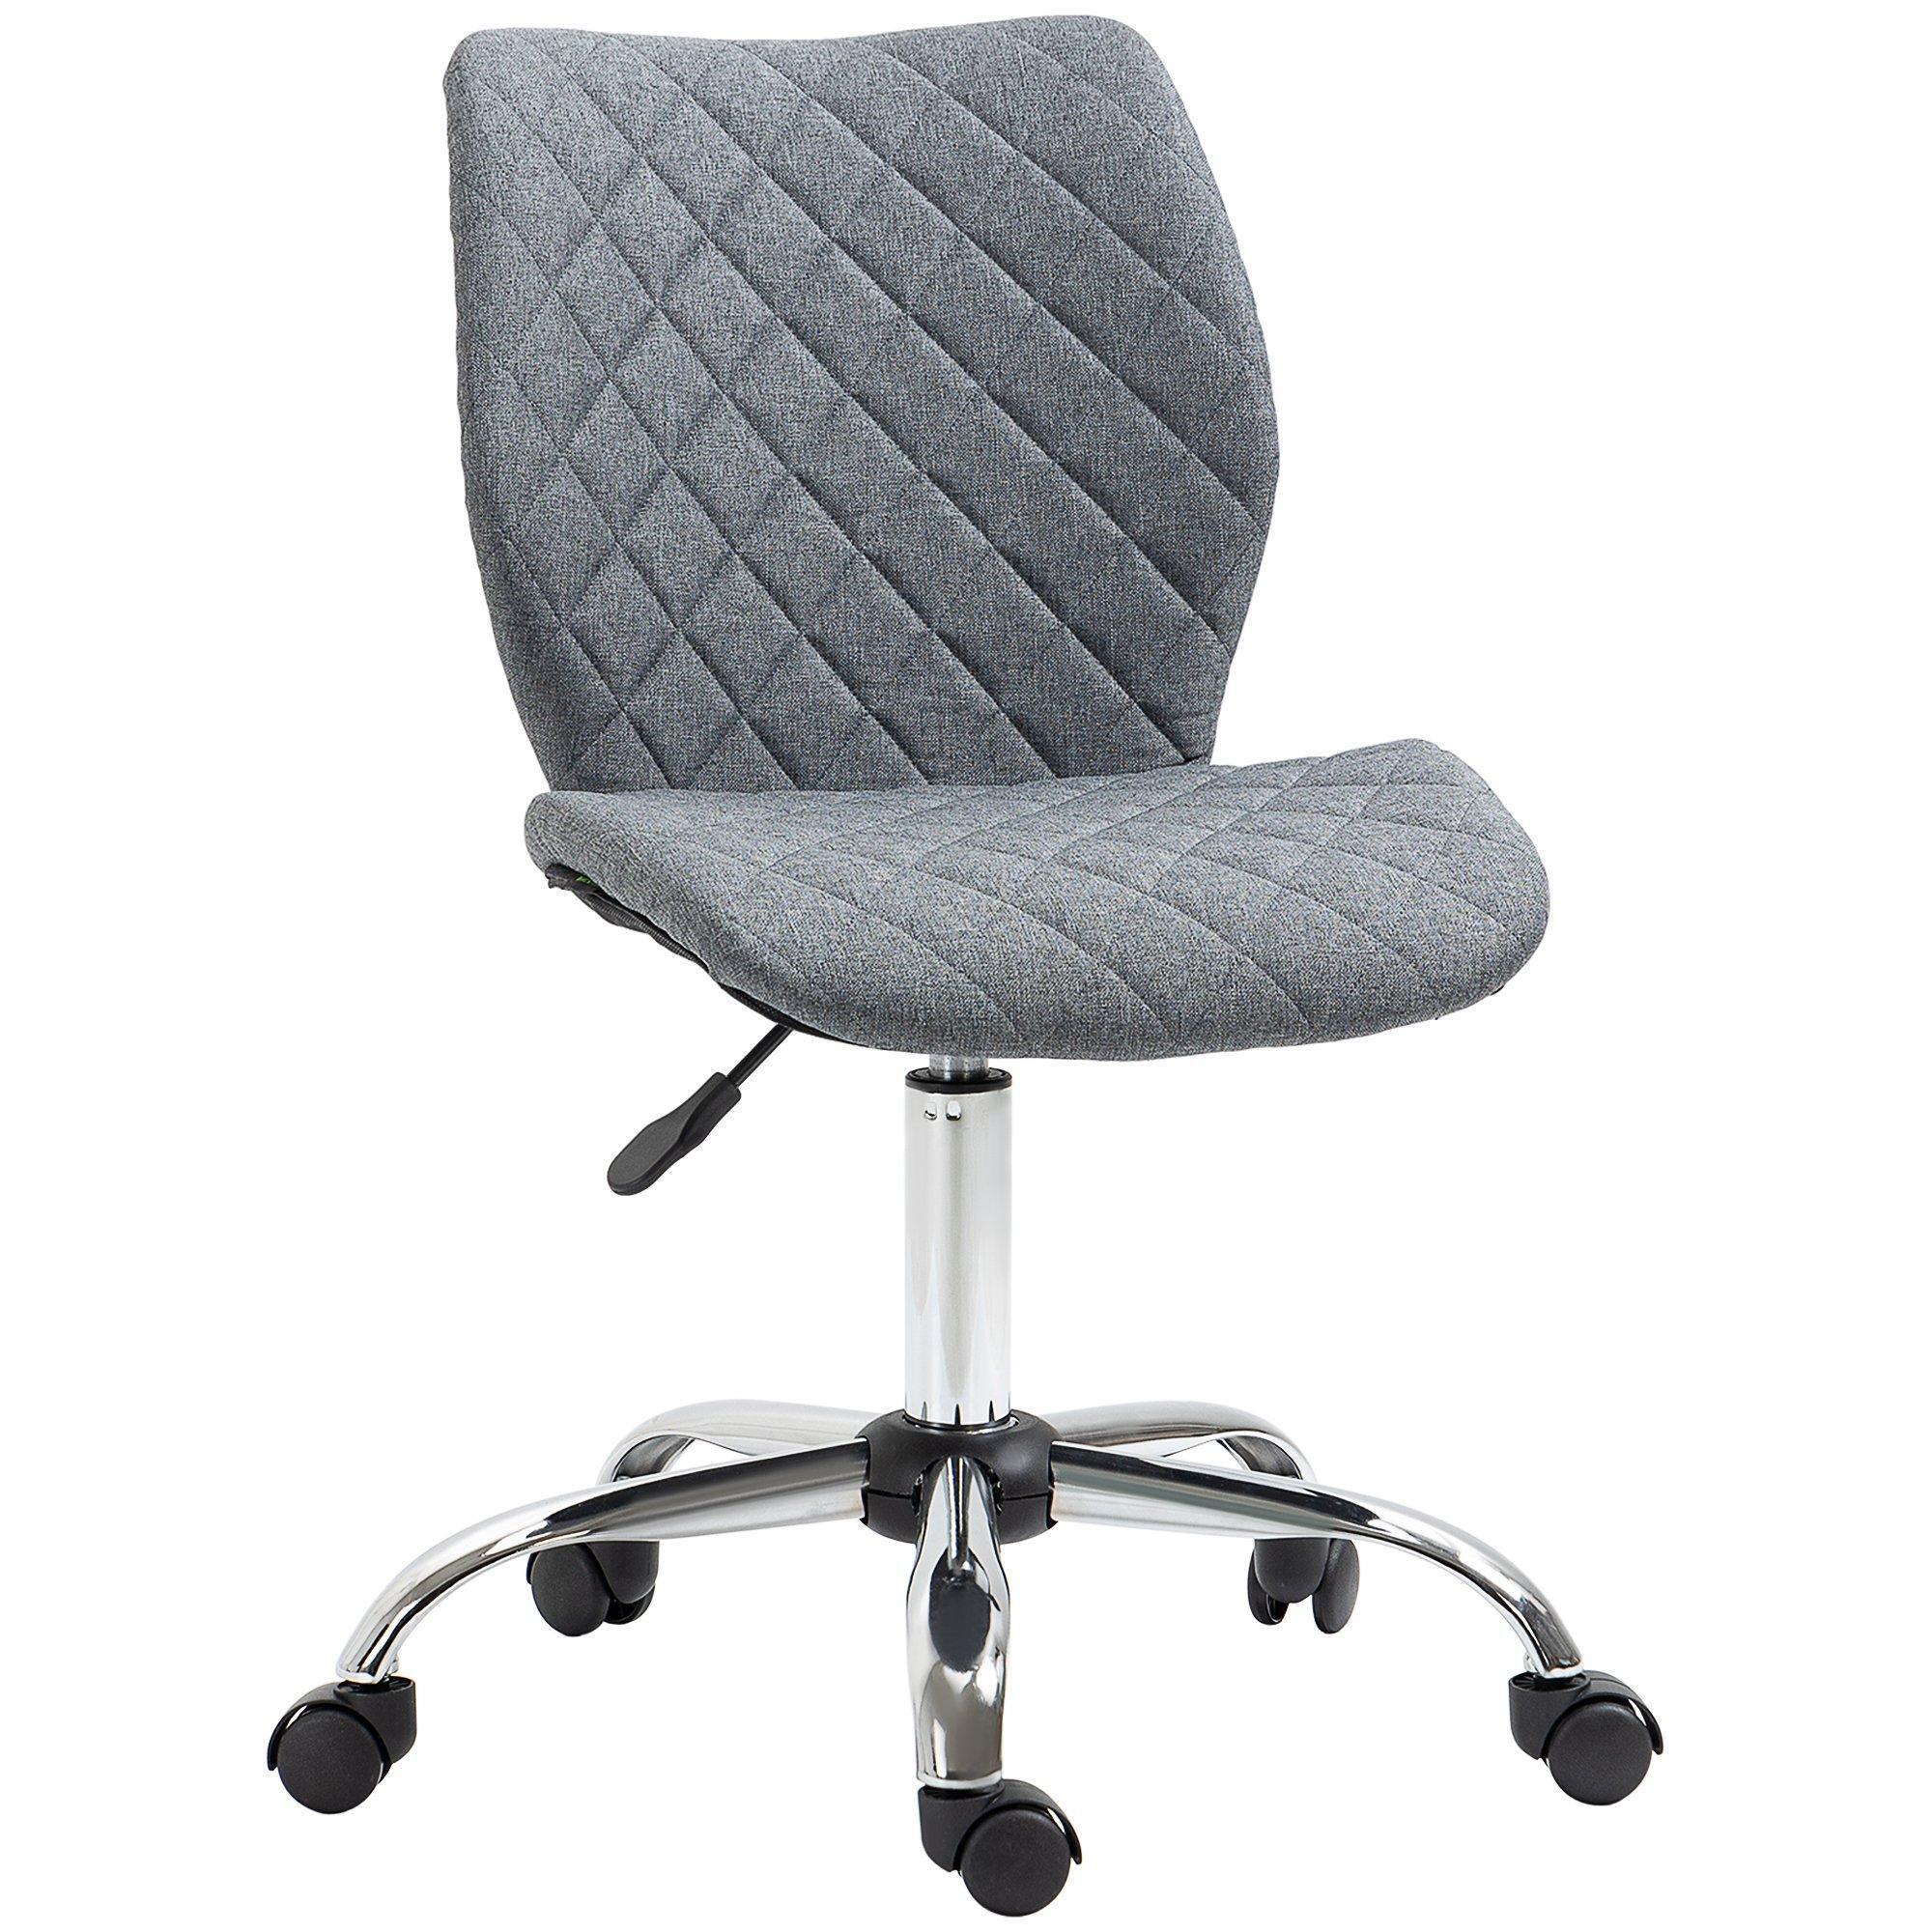 Ergonomic Mid Back Office Chair Height Adjustable Home Office - image 1